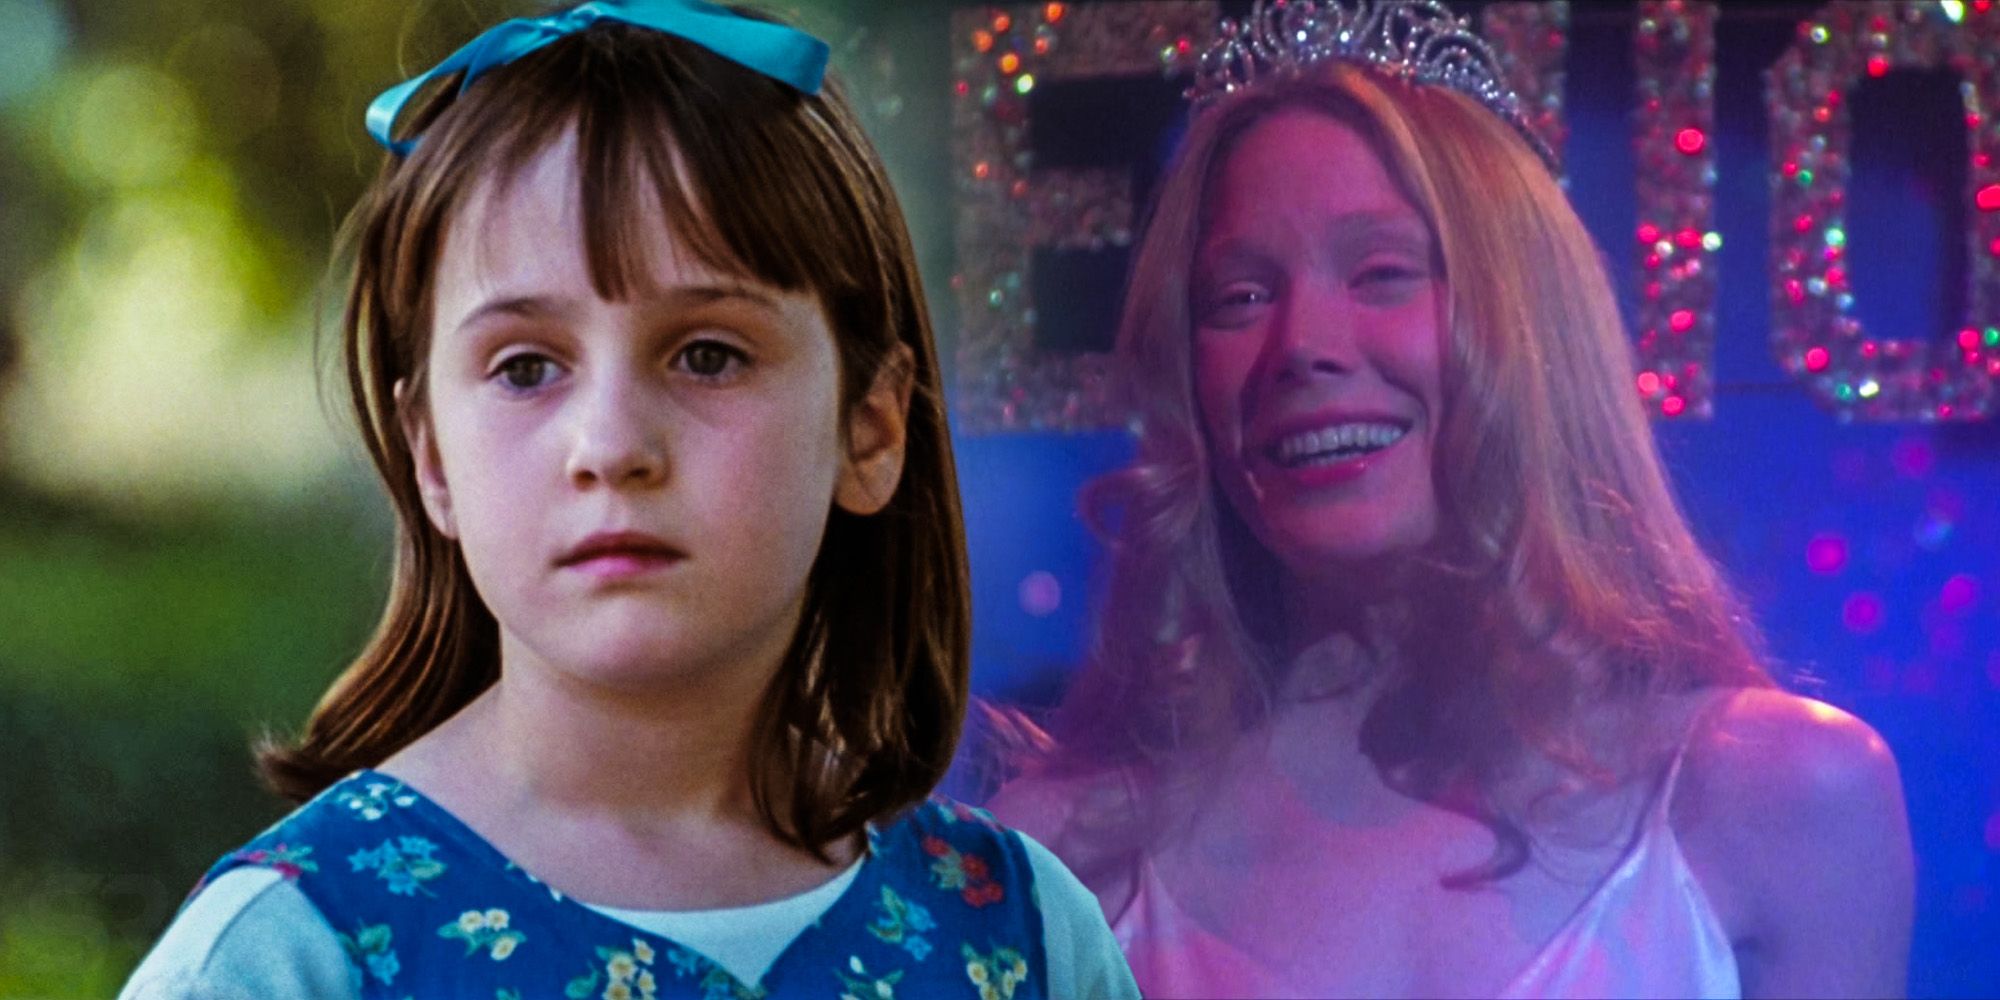 Theory connects Matilda to carrie